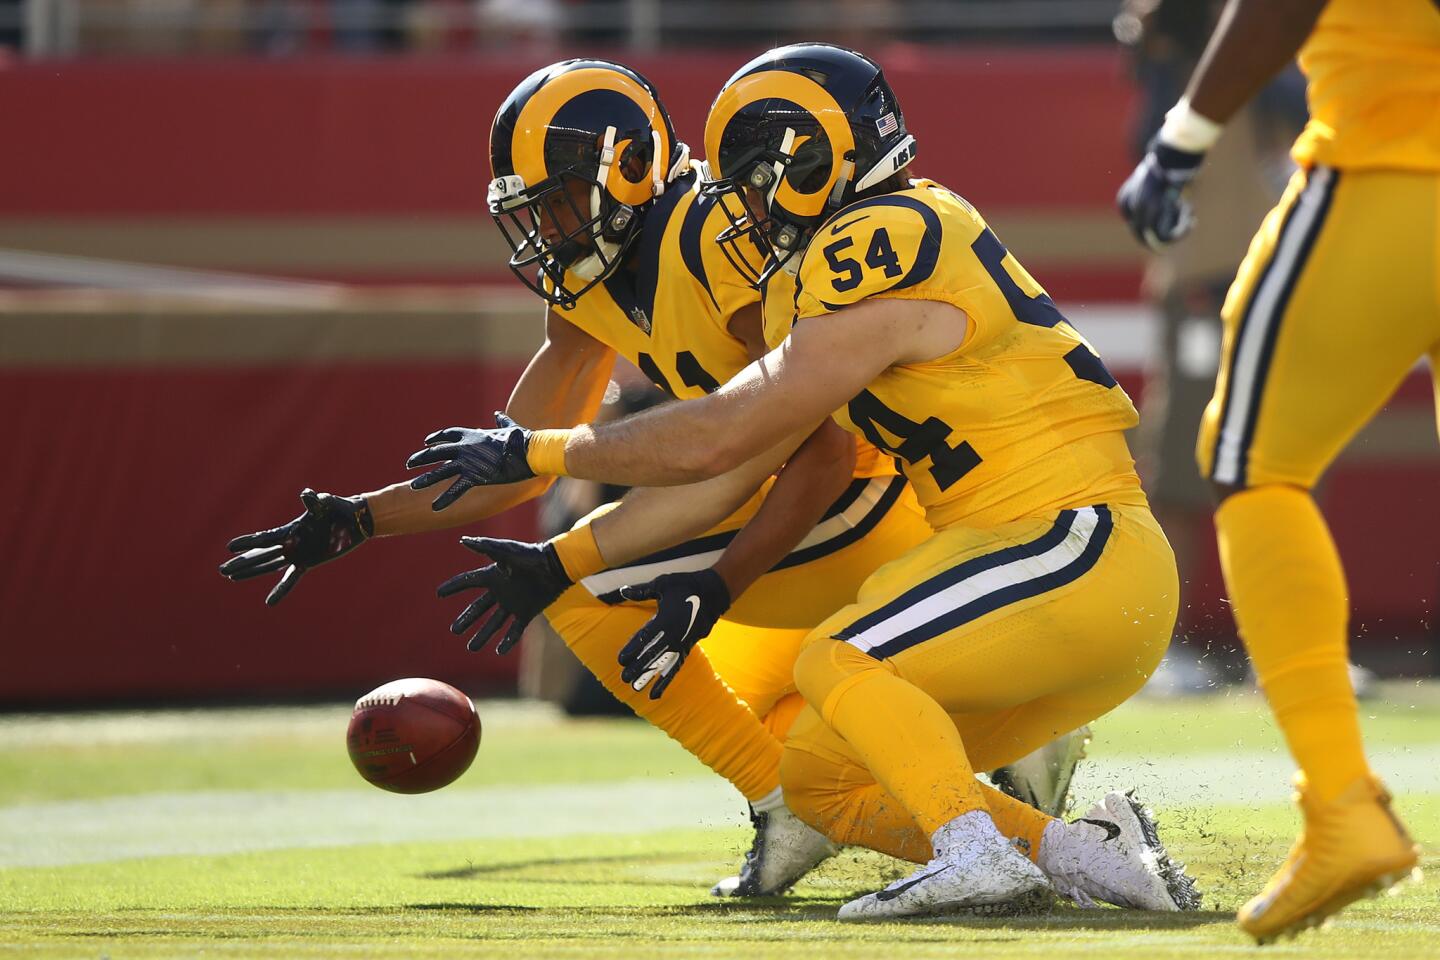 KhaDarel Hodge #11 and Bryce Hager #54 of the Los Angeles Rams dive for a blocked punt in the endzone during their NFL game against the San Francisco 49ers at Levi's Stadium on October 21, 2018 in Santa Clara, California.